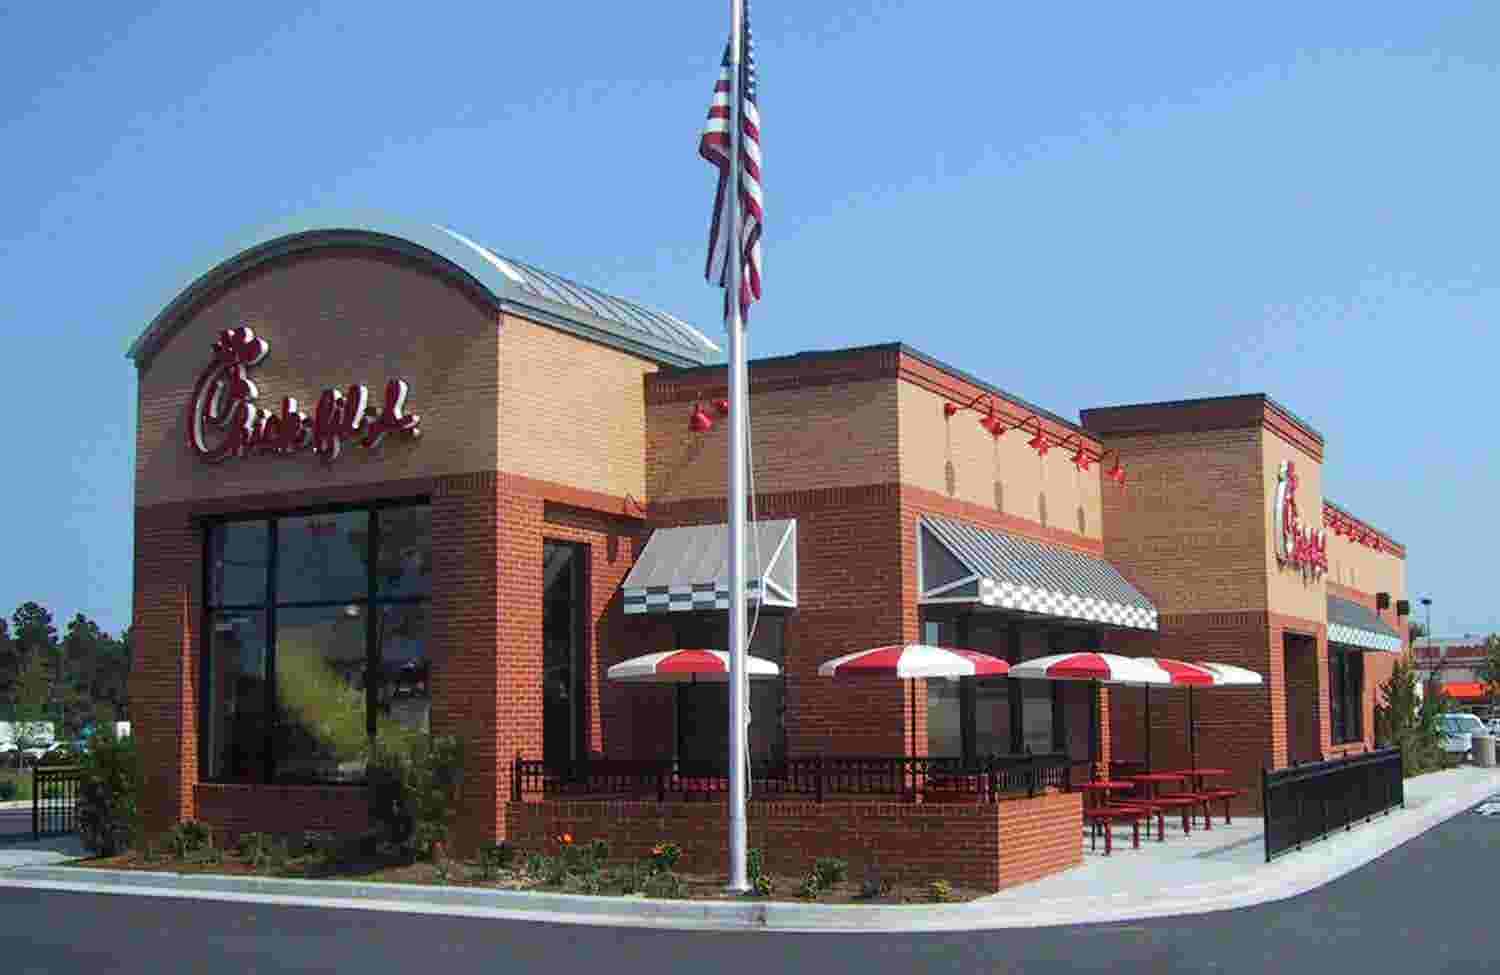  Chick-fil-A CEO Pledges to Father To Uphold Christian Values and Stay Closed on Sundays